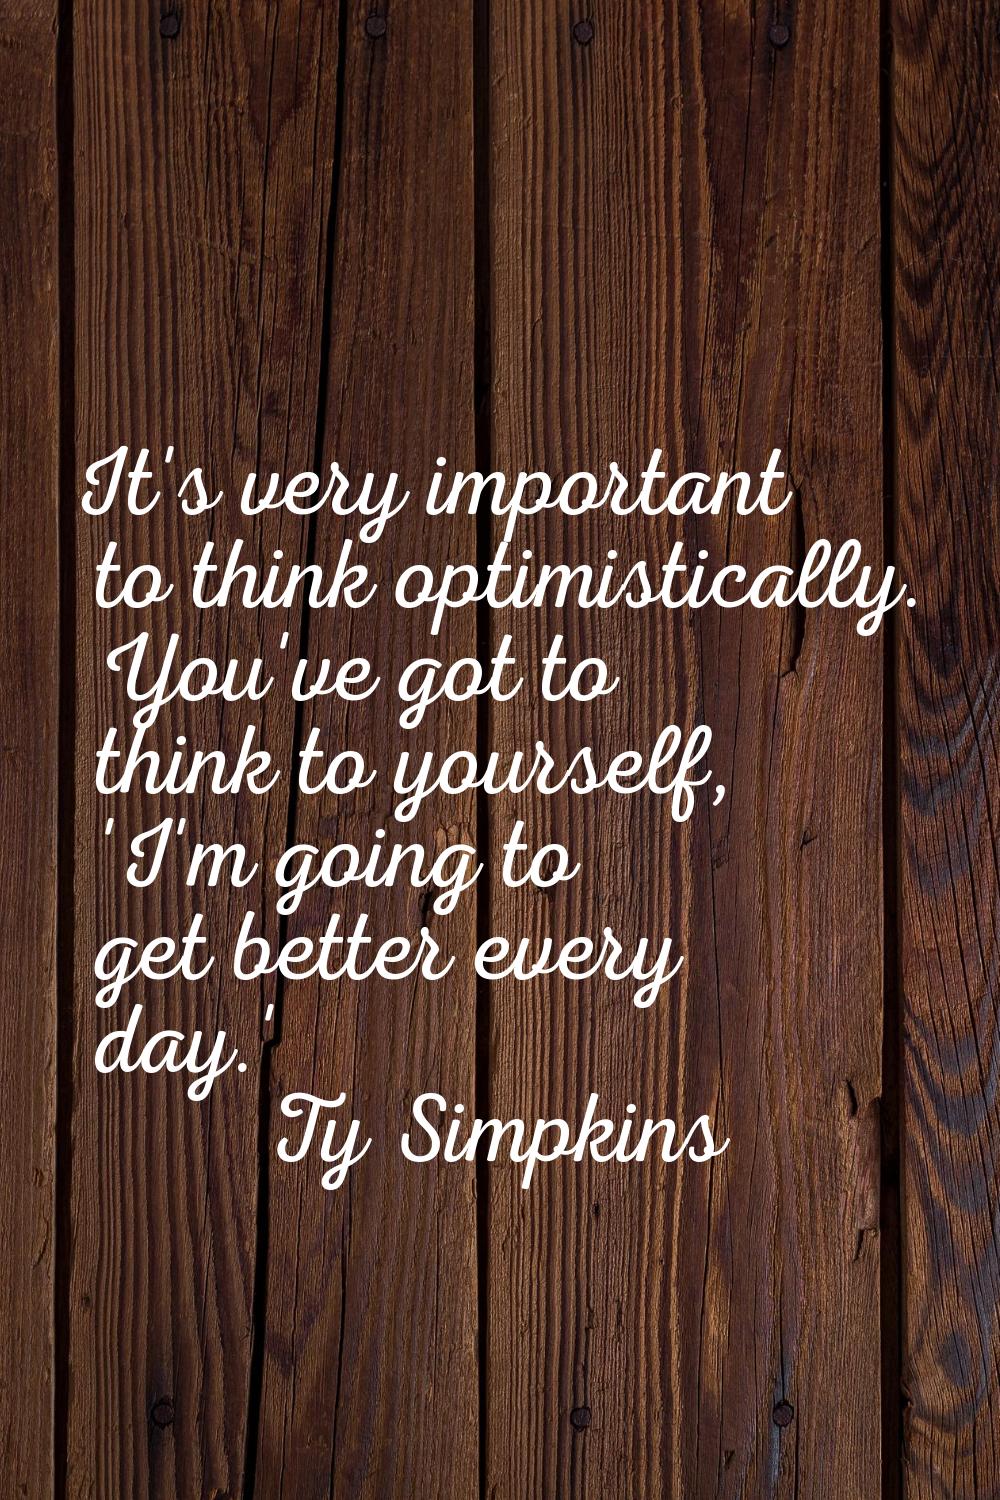 It's very important to think optimistically. You've got to think to yourself, 'I'm going to get bet